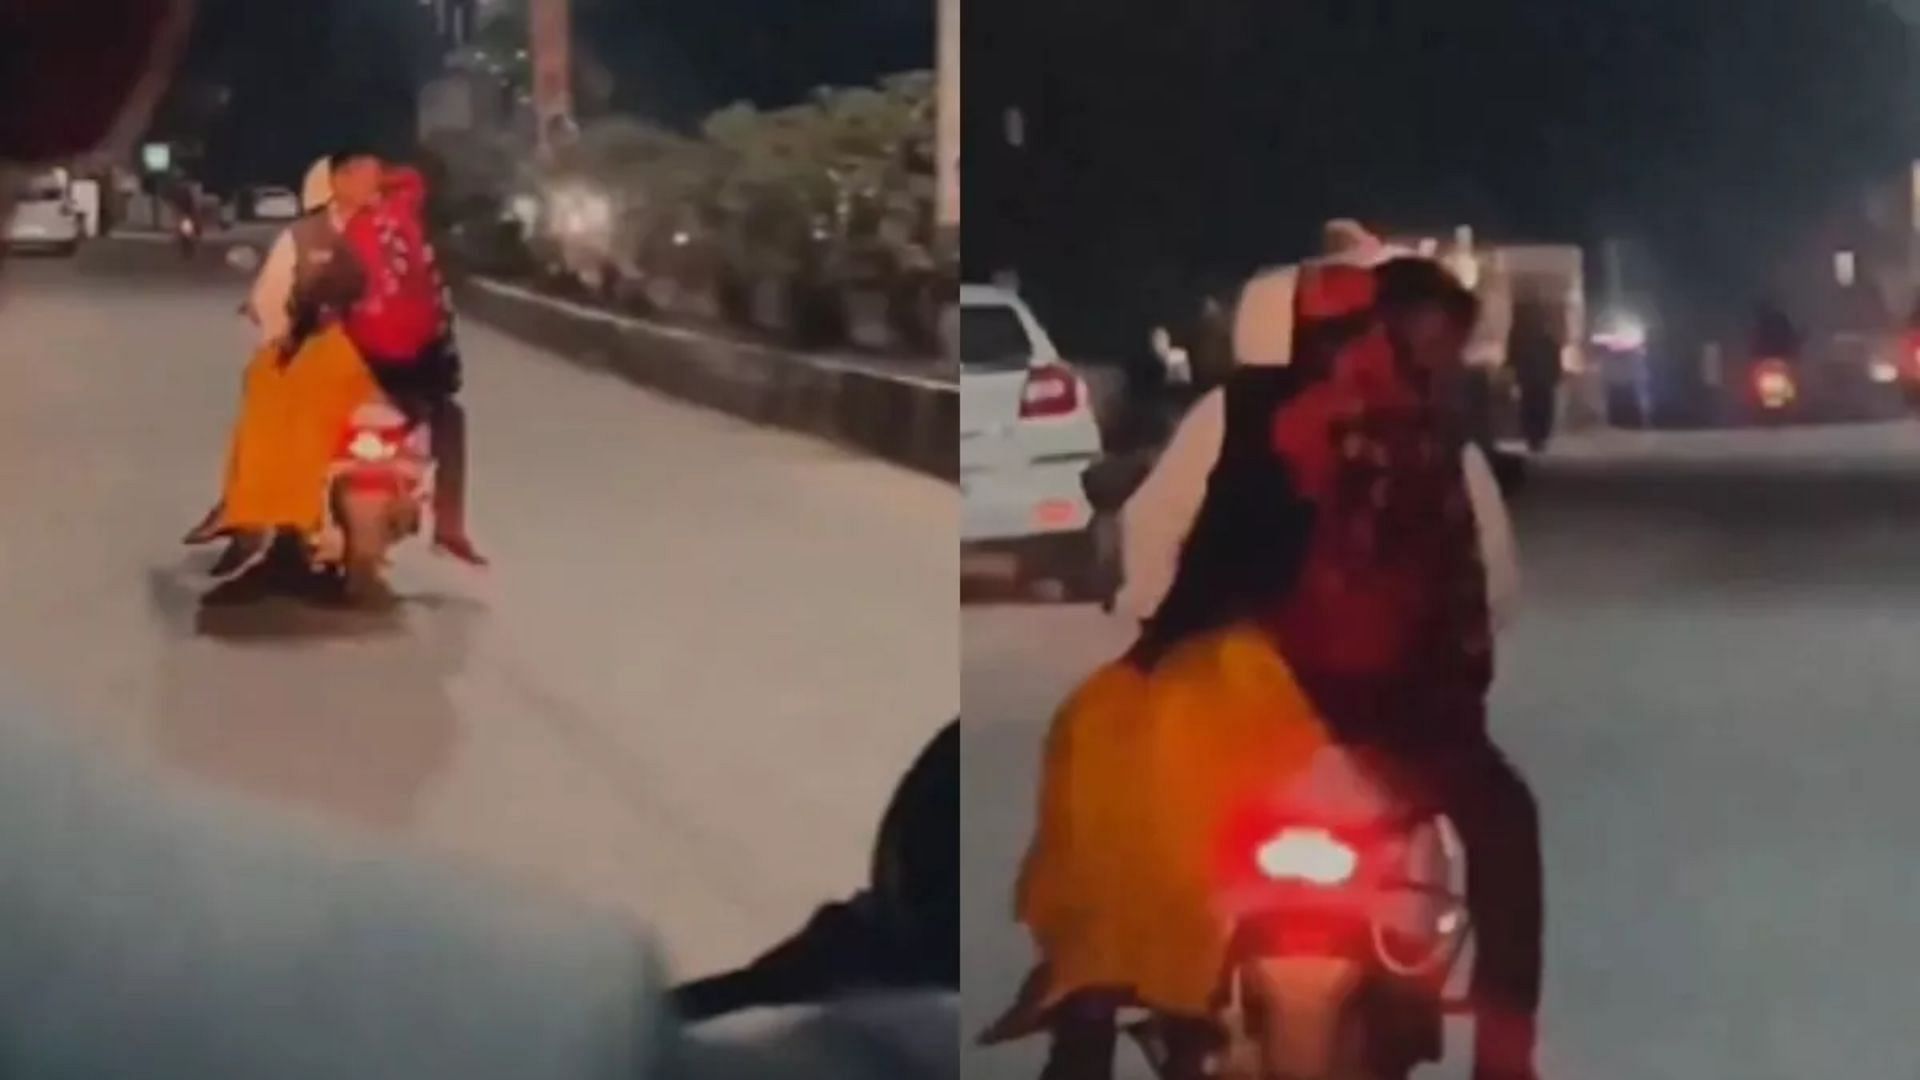 viral video of man kissing woman on moving scooter goes viral on social media